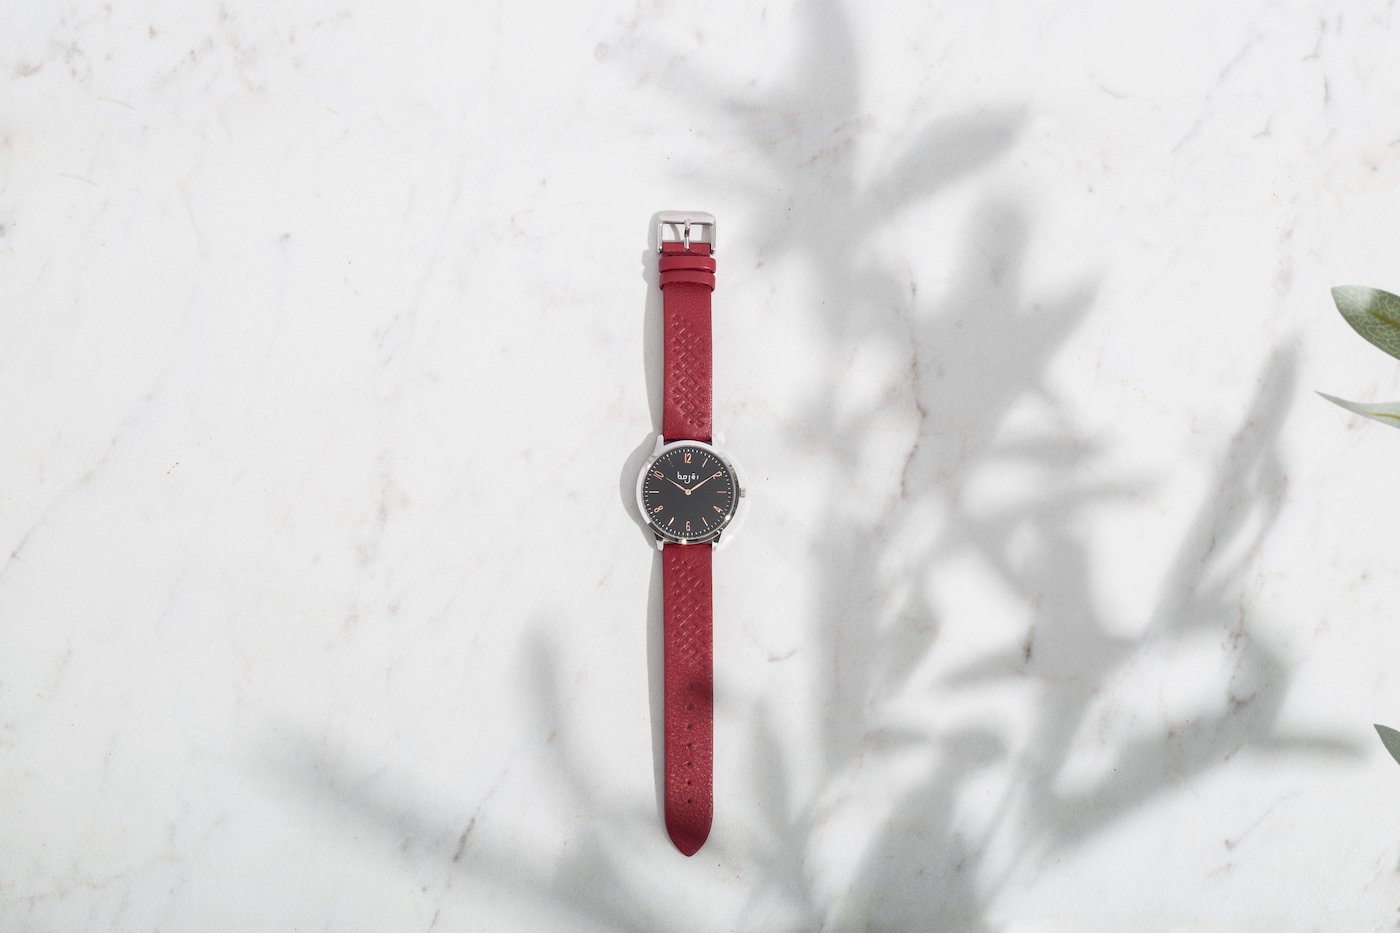 Bajer Watches, committed to Kurdish art and culture